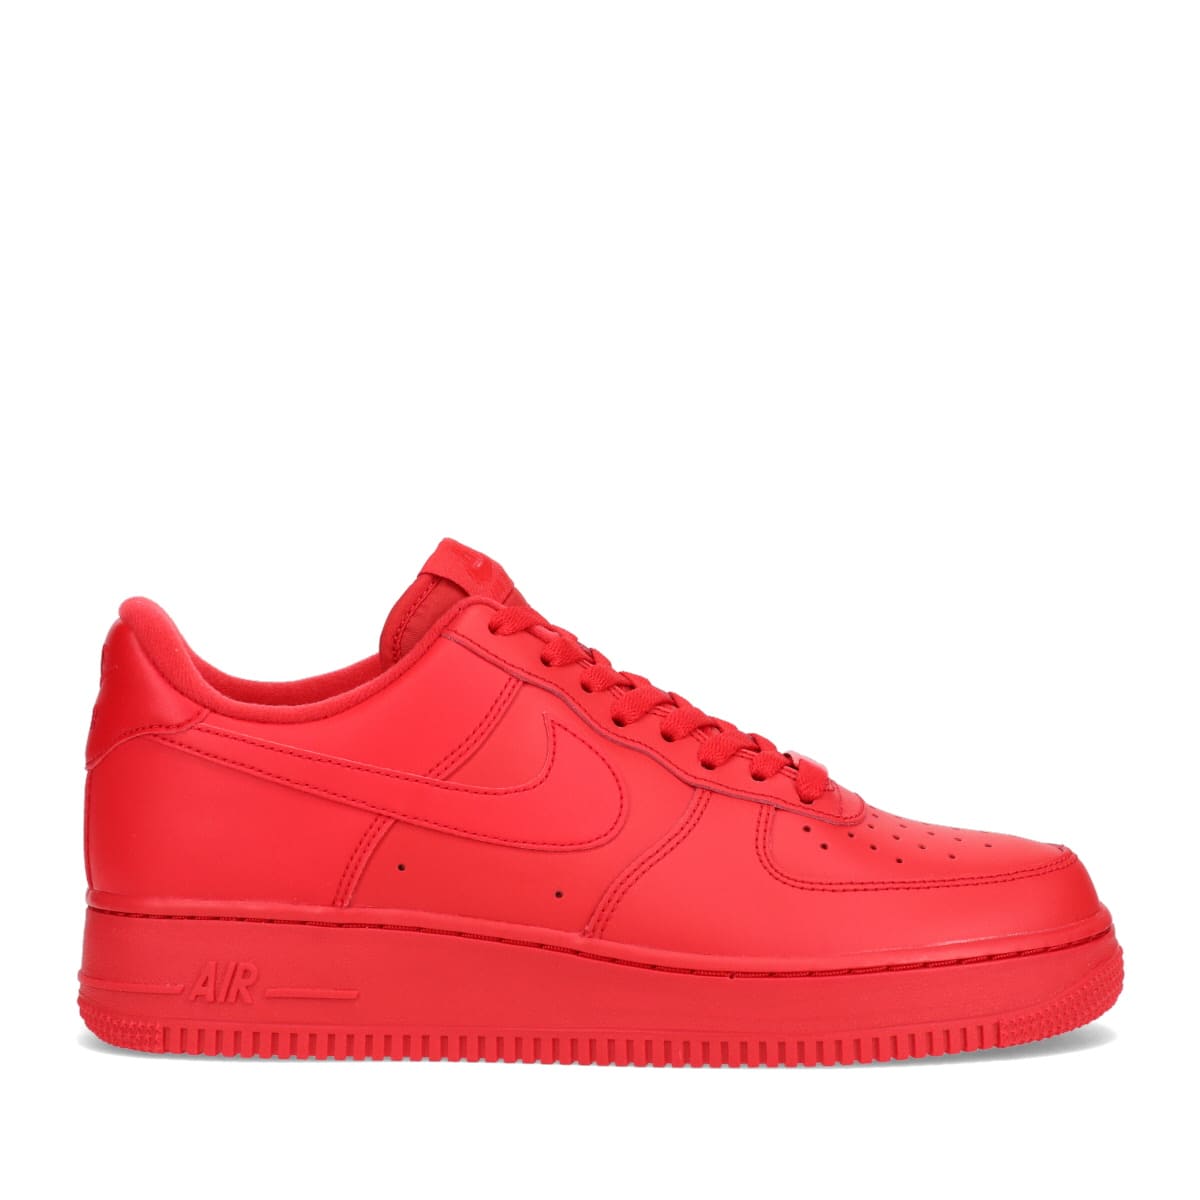 NIKE AIR FORCE 1 ‘07 LV8 RED 26.0cm